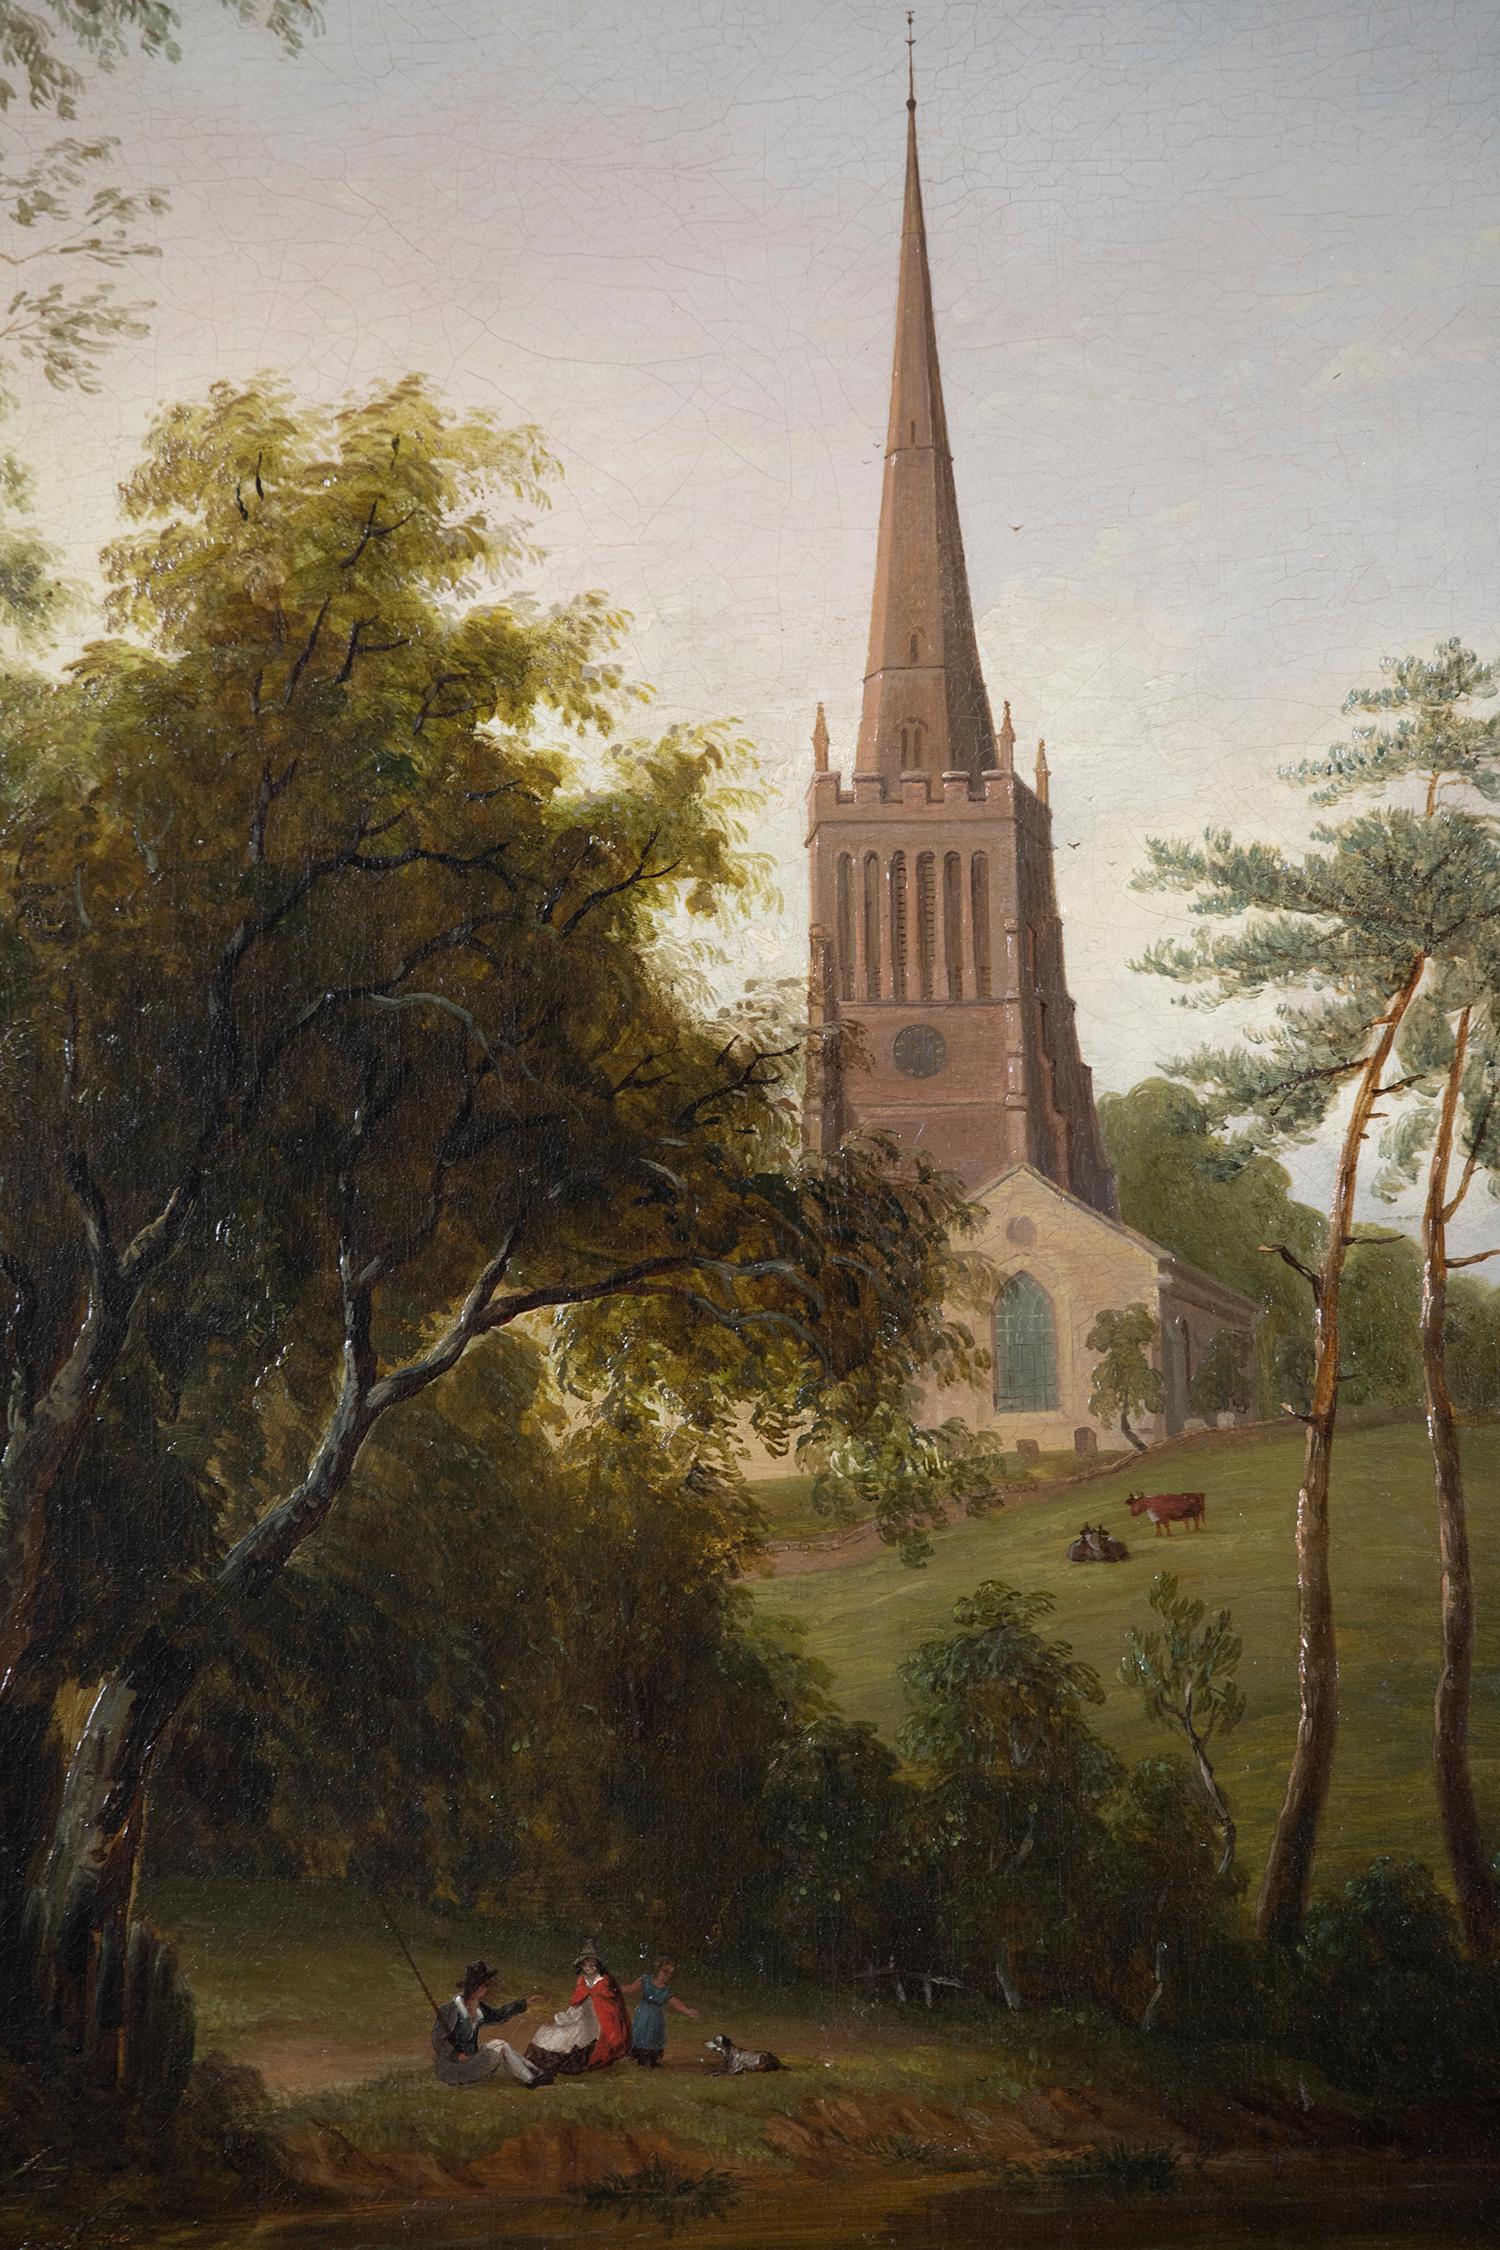 Figures by a Pond, with Cattle and a Church beyond by Sarah Ferneley (1812-1903)
Oil on canvas
76.5 x 63.5 (30 ⅛ x 25 inches)
Executed circa 1840

Beautifully presented in a heavy period gold frame